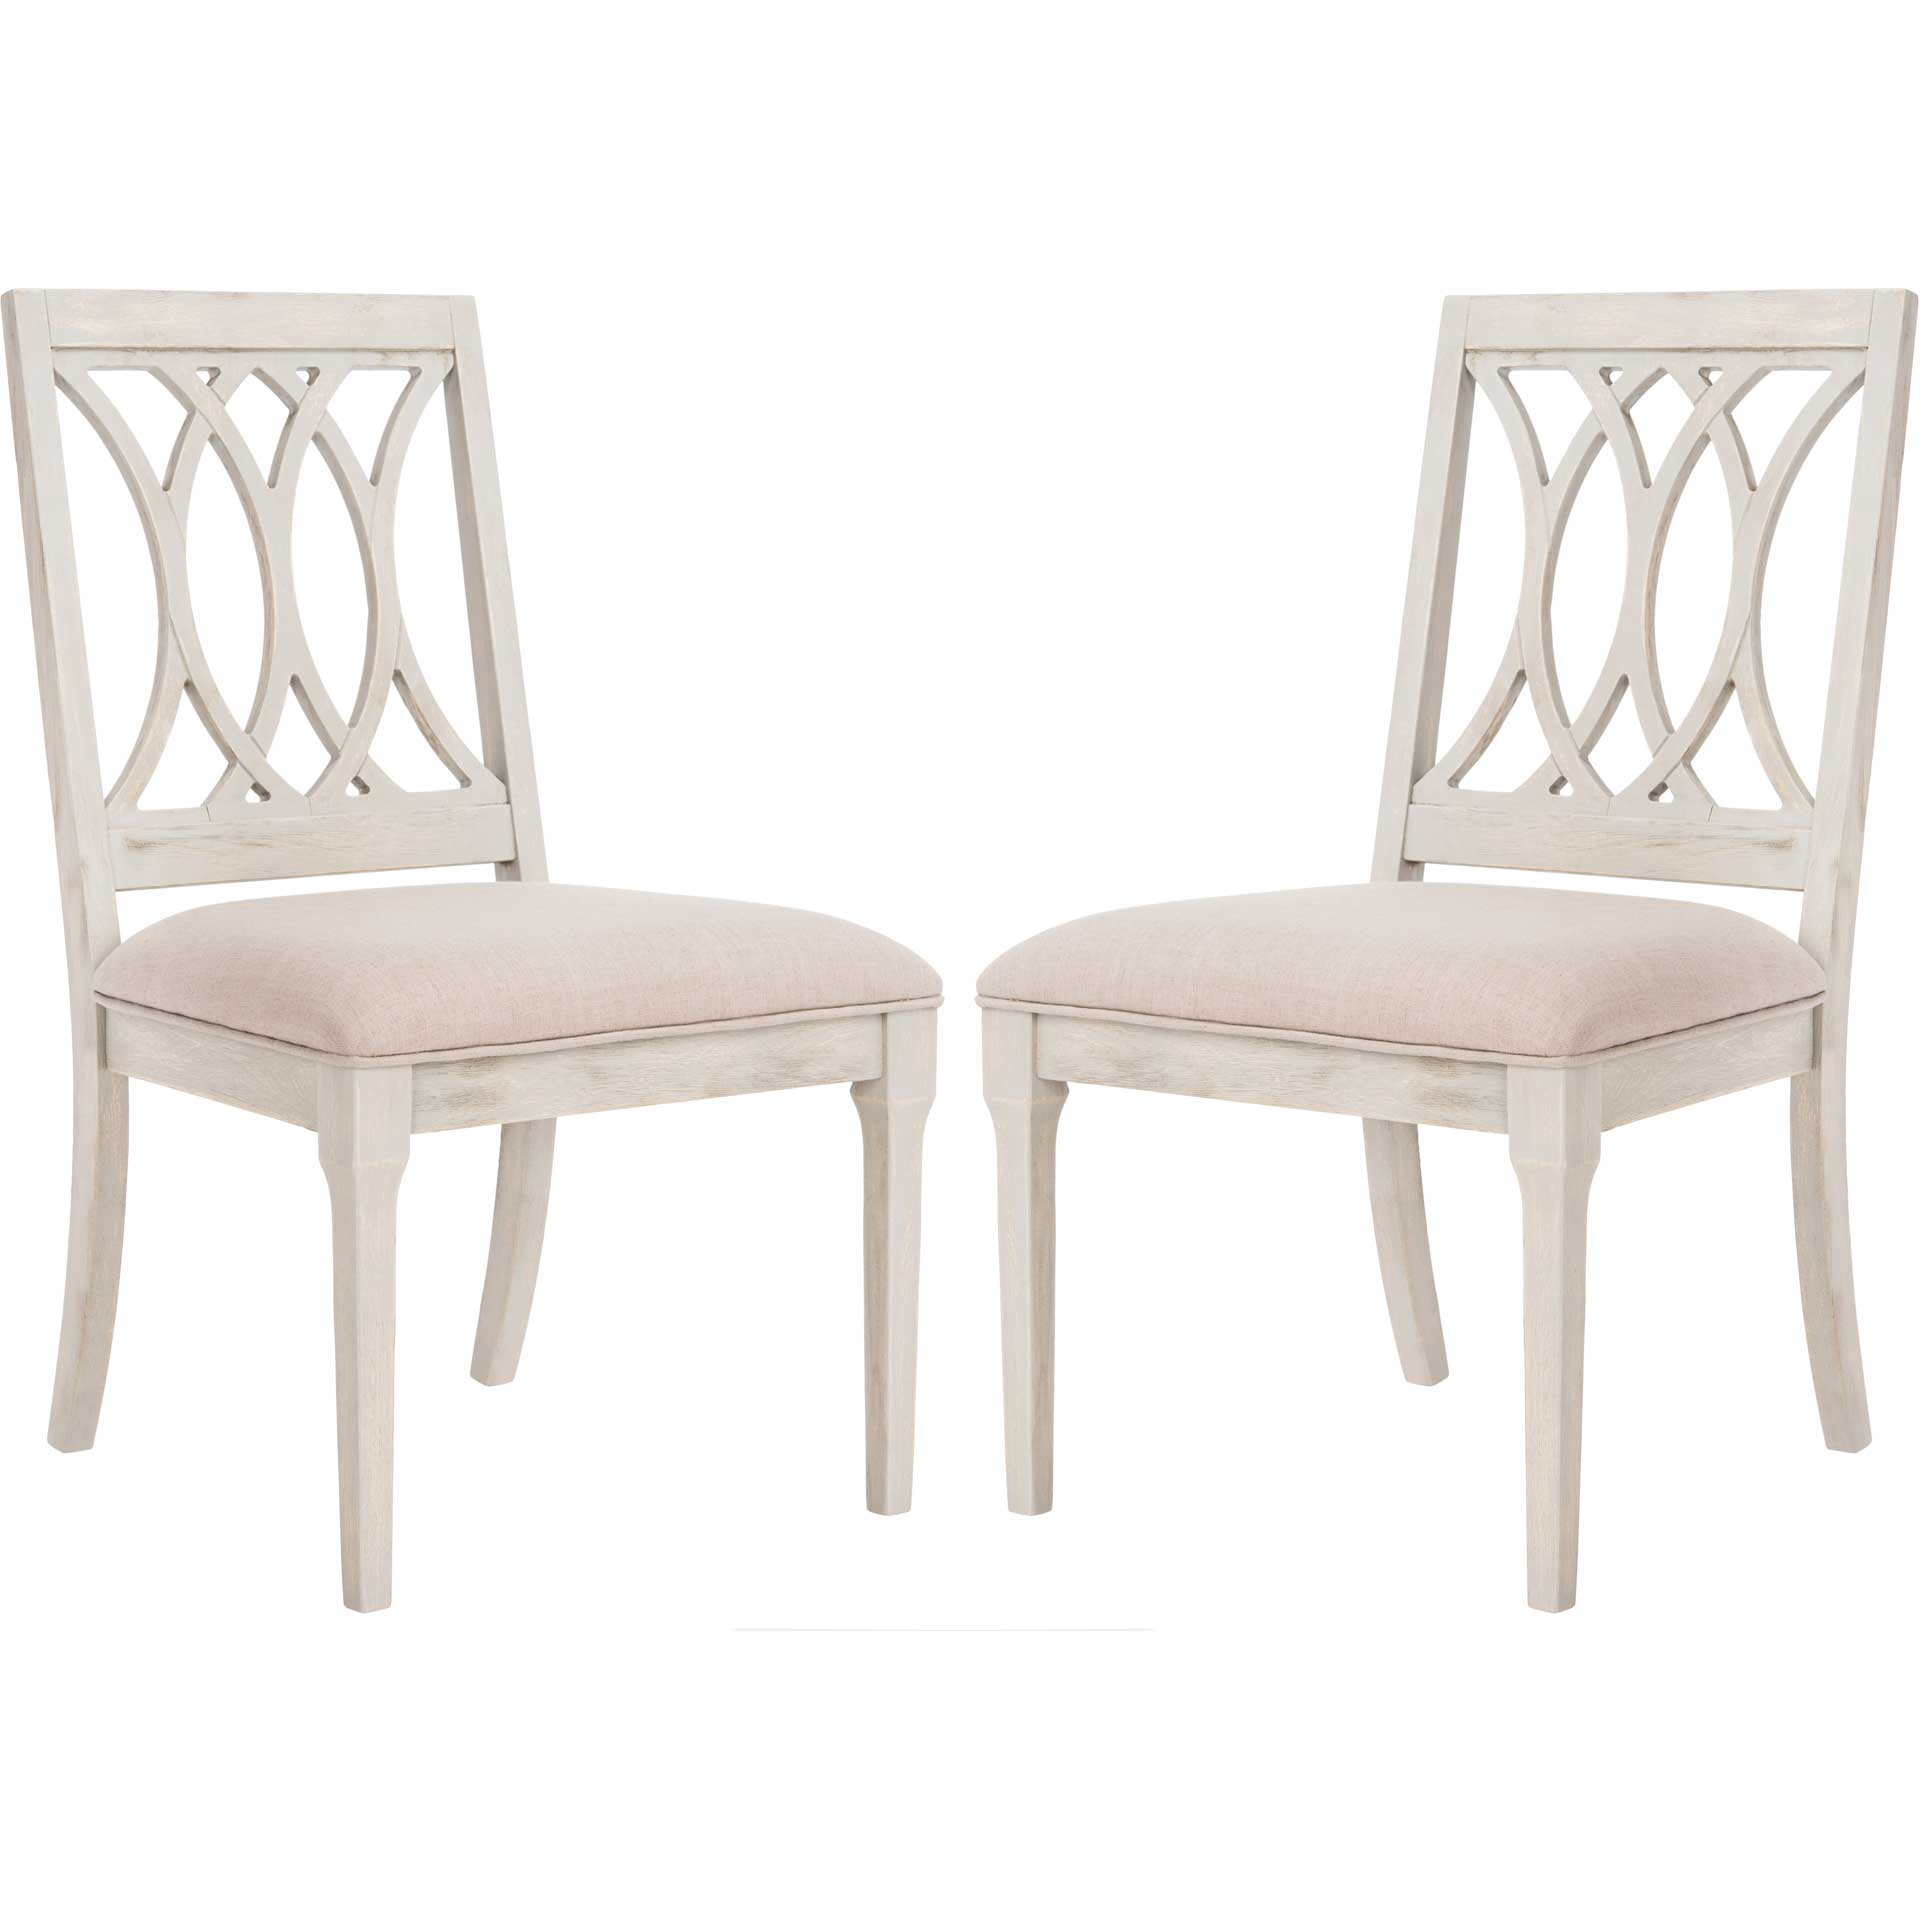 Seaside Linen Side Chair Taupe/Rustic Gray (Set of 2)